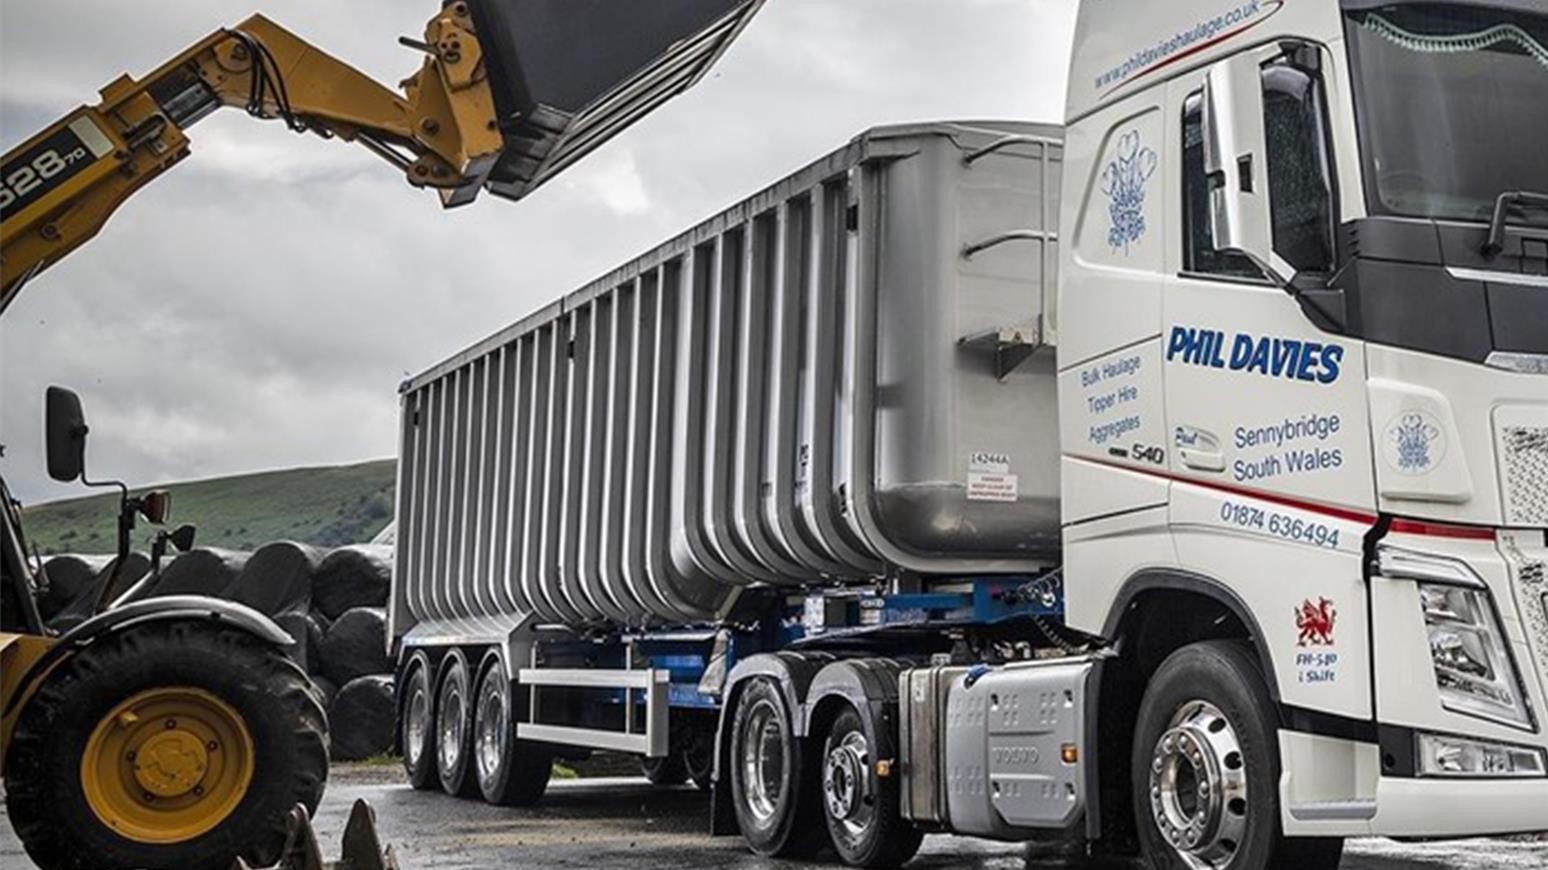 New Volvo FH Lite Pusher Axle Tractor Unit For Phil Davies